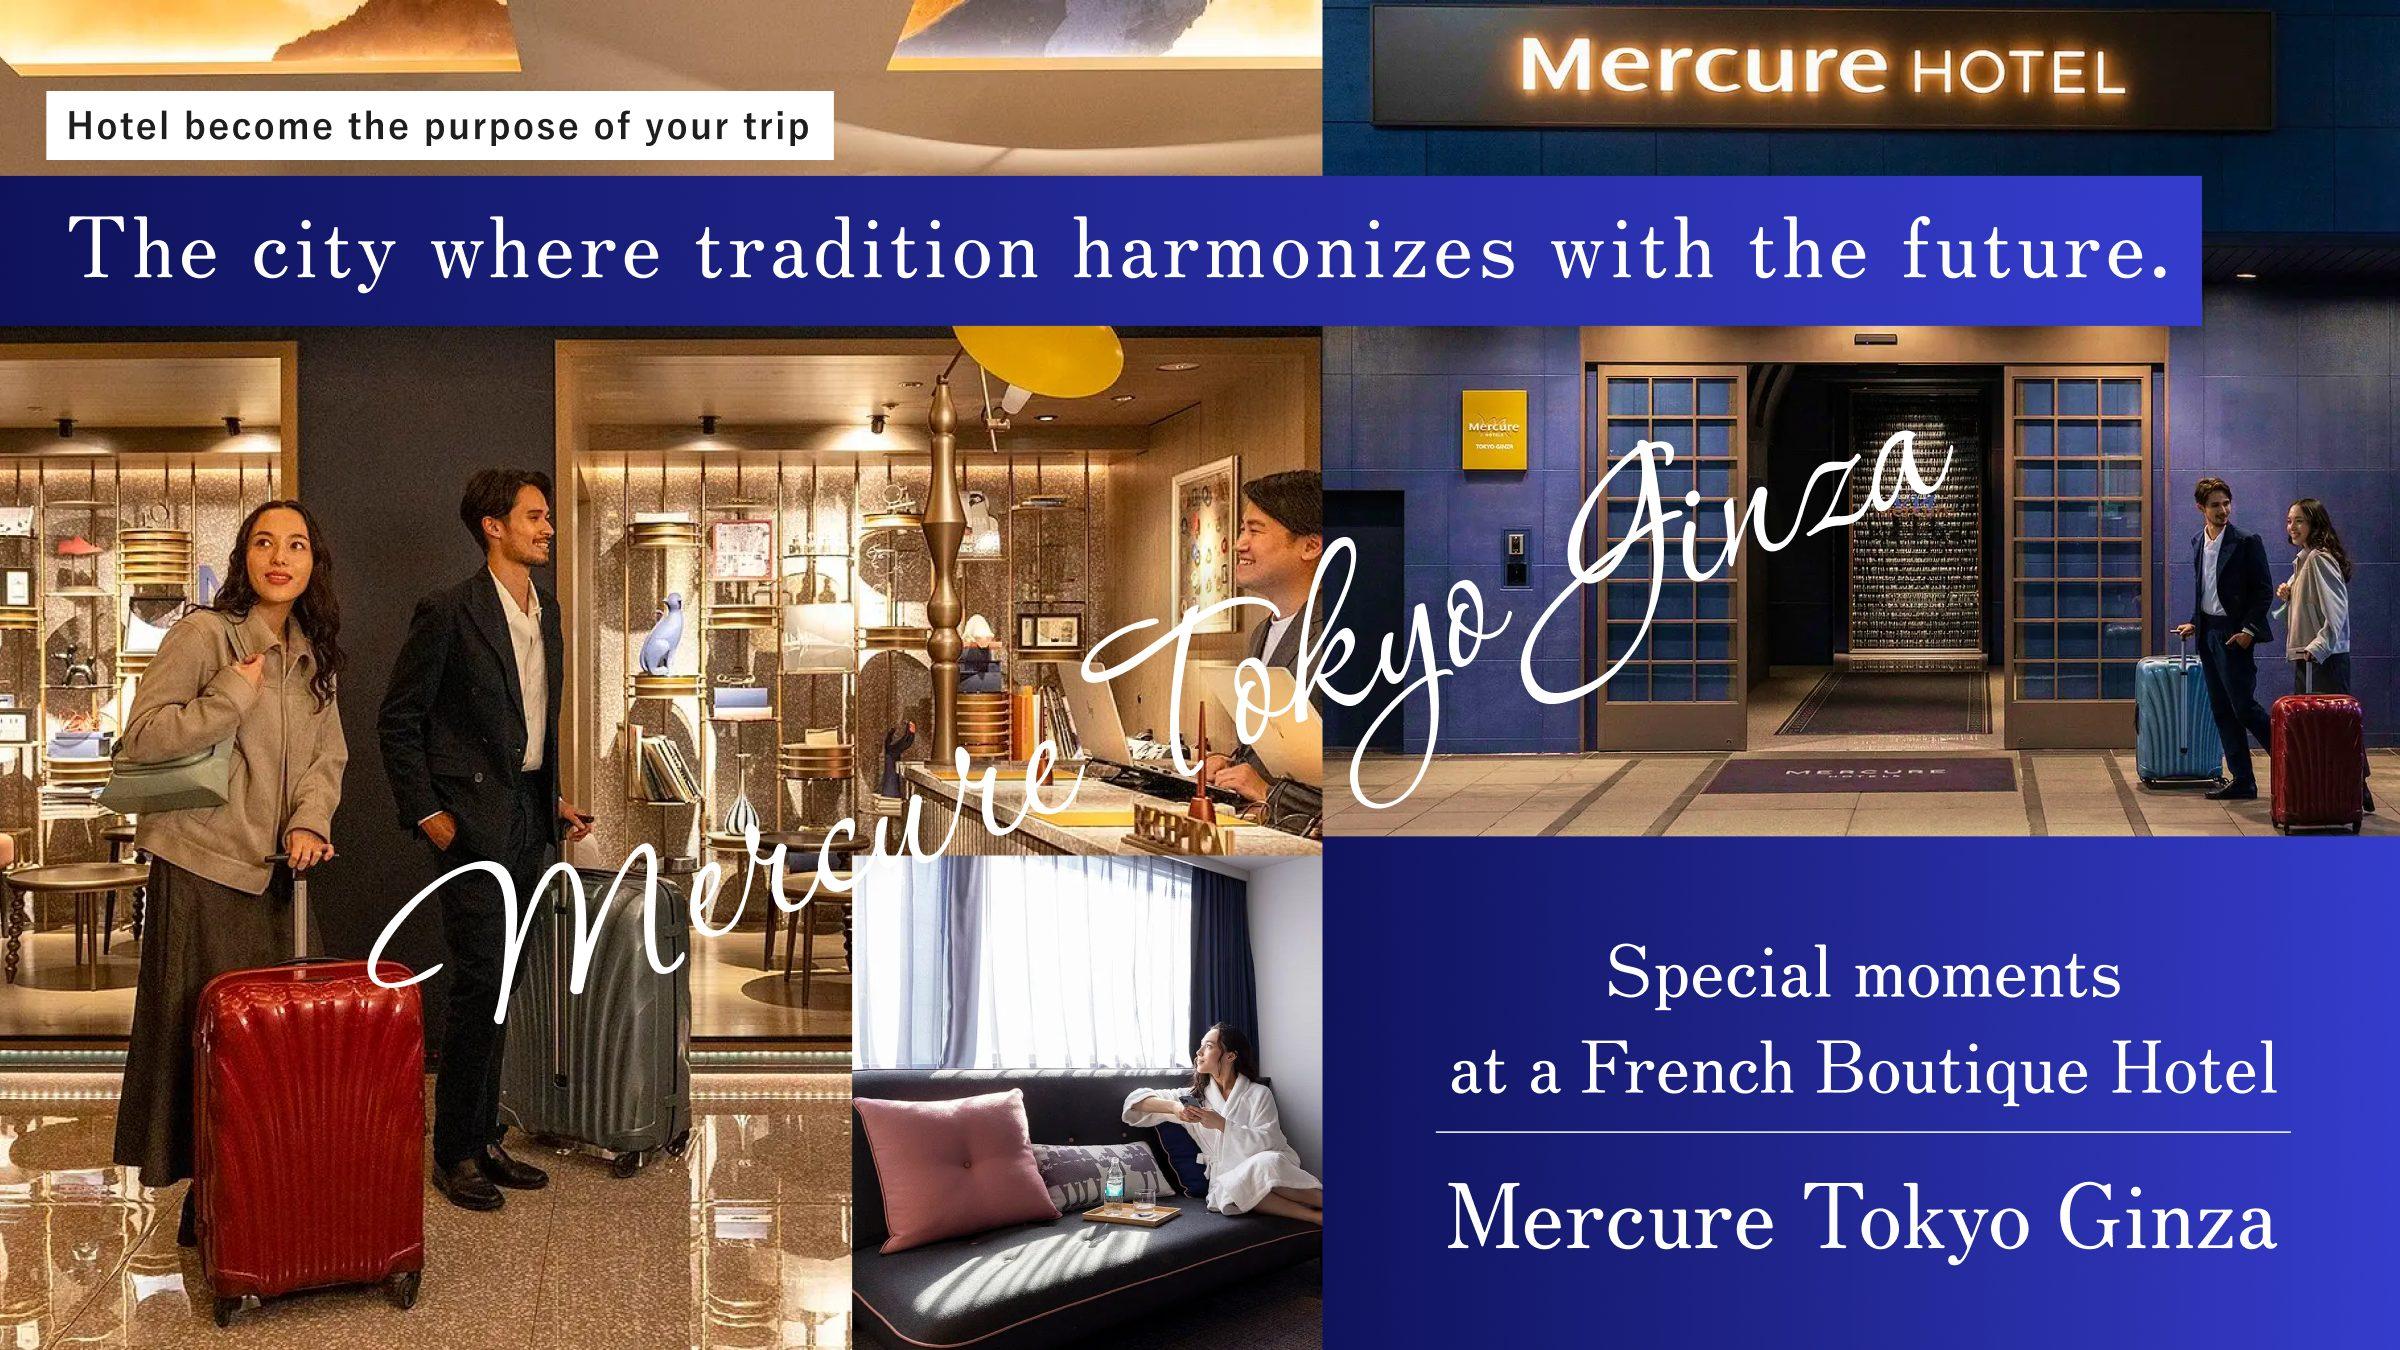 【Hotel become the purpose of your trip】“The city where tradition harmonizes with the future. Special moments at a French Boutique Hotel”- Mercure Tokyo Ginza